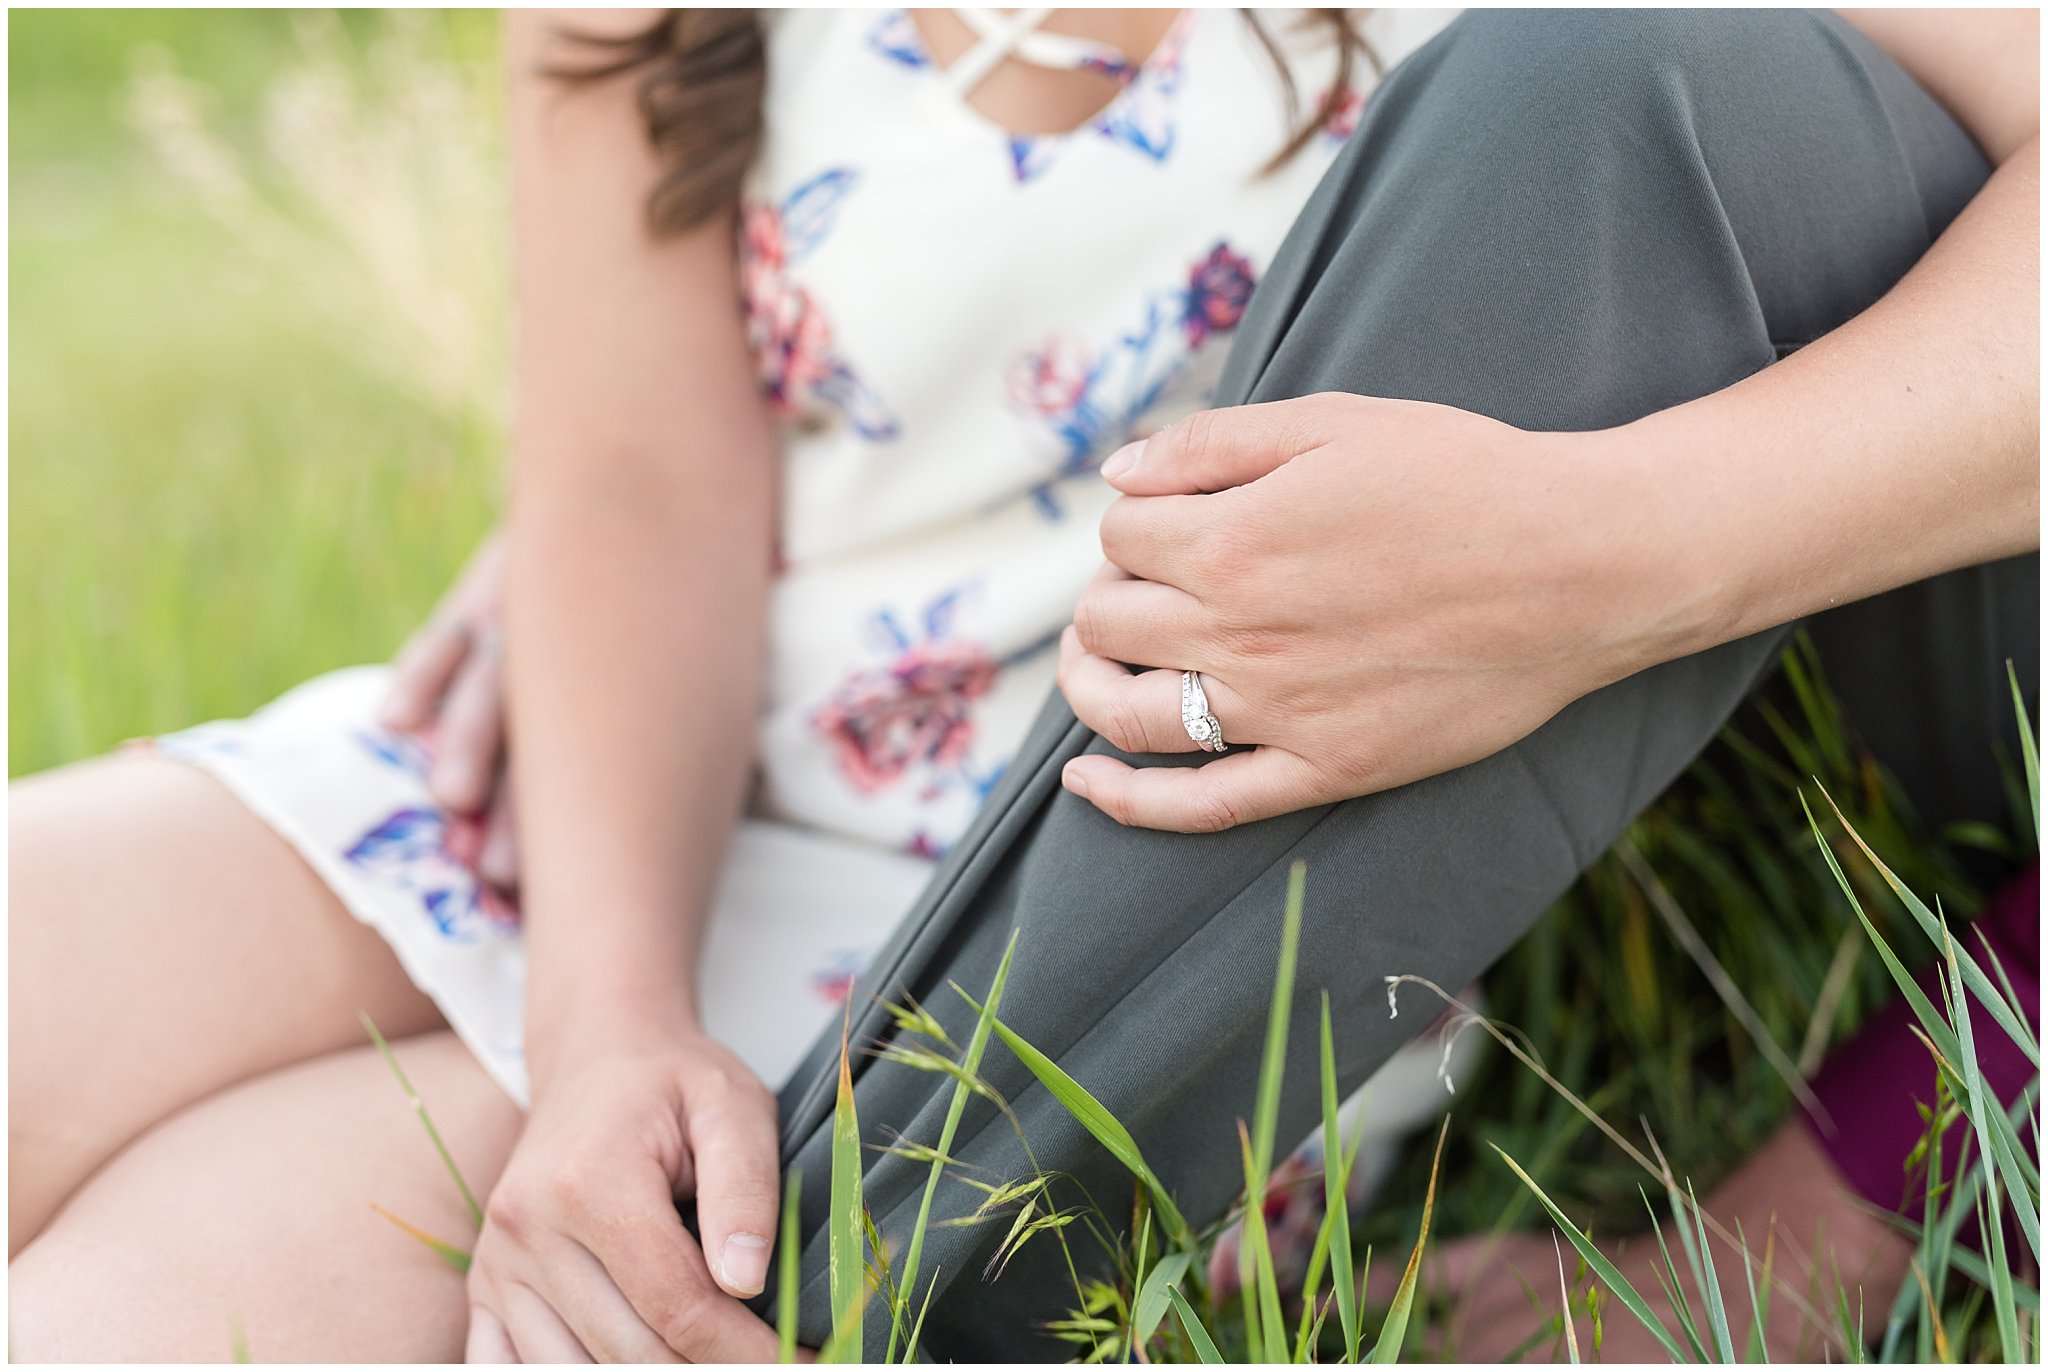 Details shot during engagement session with mountains in the background and wildflowers | Snowbasin Utah Engagements